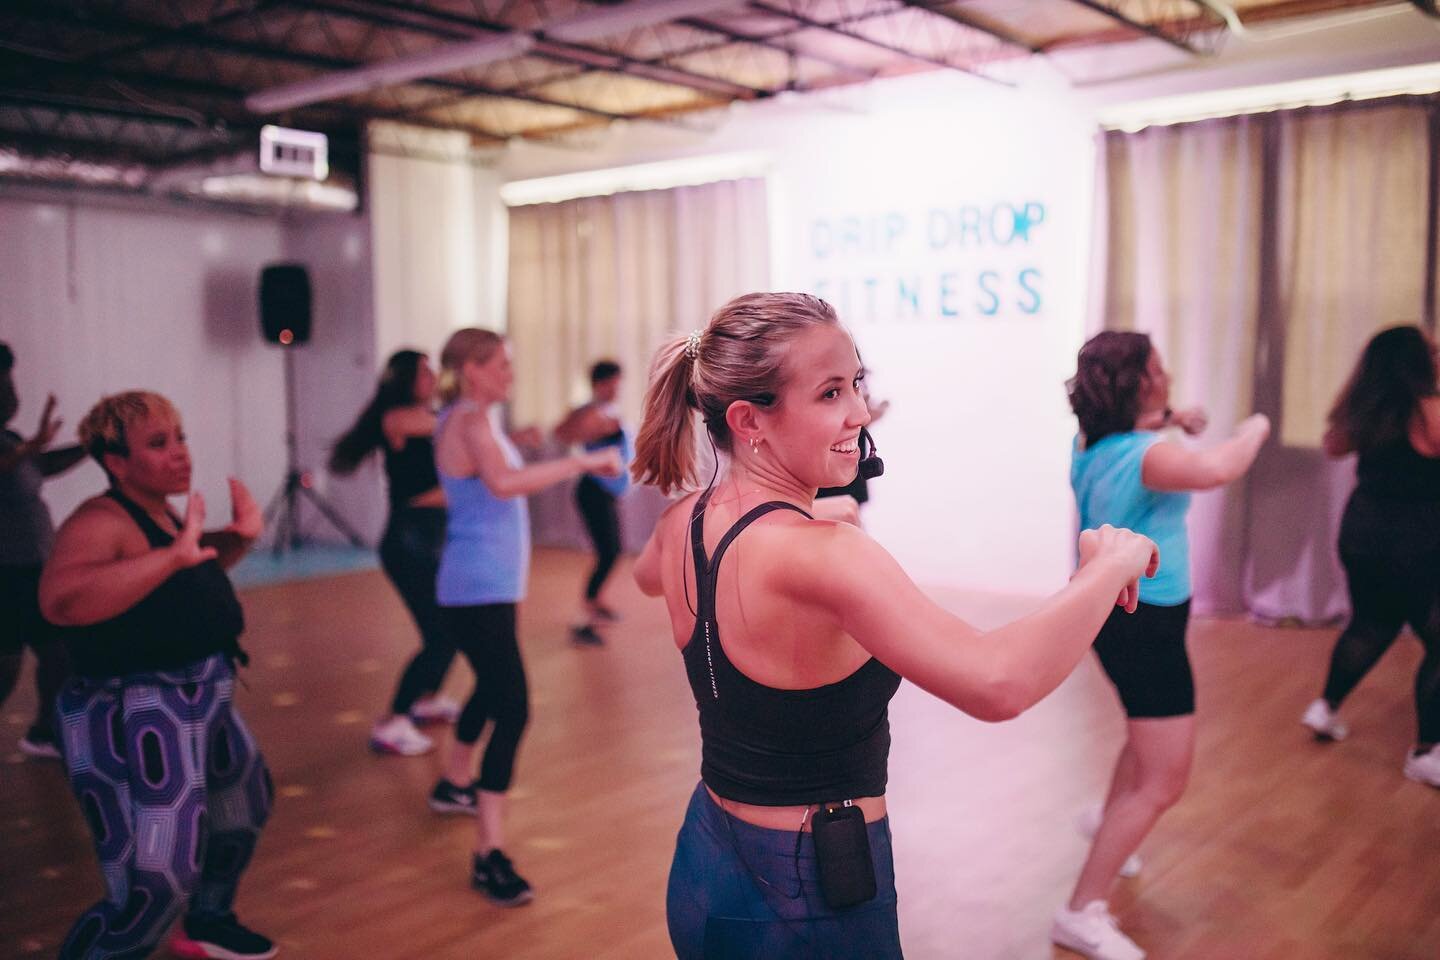 GIVEAWAY 💦 Can&rsquo;t seem to find a fitness routine you enjoy?! Let us show you how fun dropping it like it&rsquo;s hot is at DDF!

-TWO winners-
One Tallahassee local (or within driving distance) will receive a 2 Week Unlimited Class Pass!
One pe